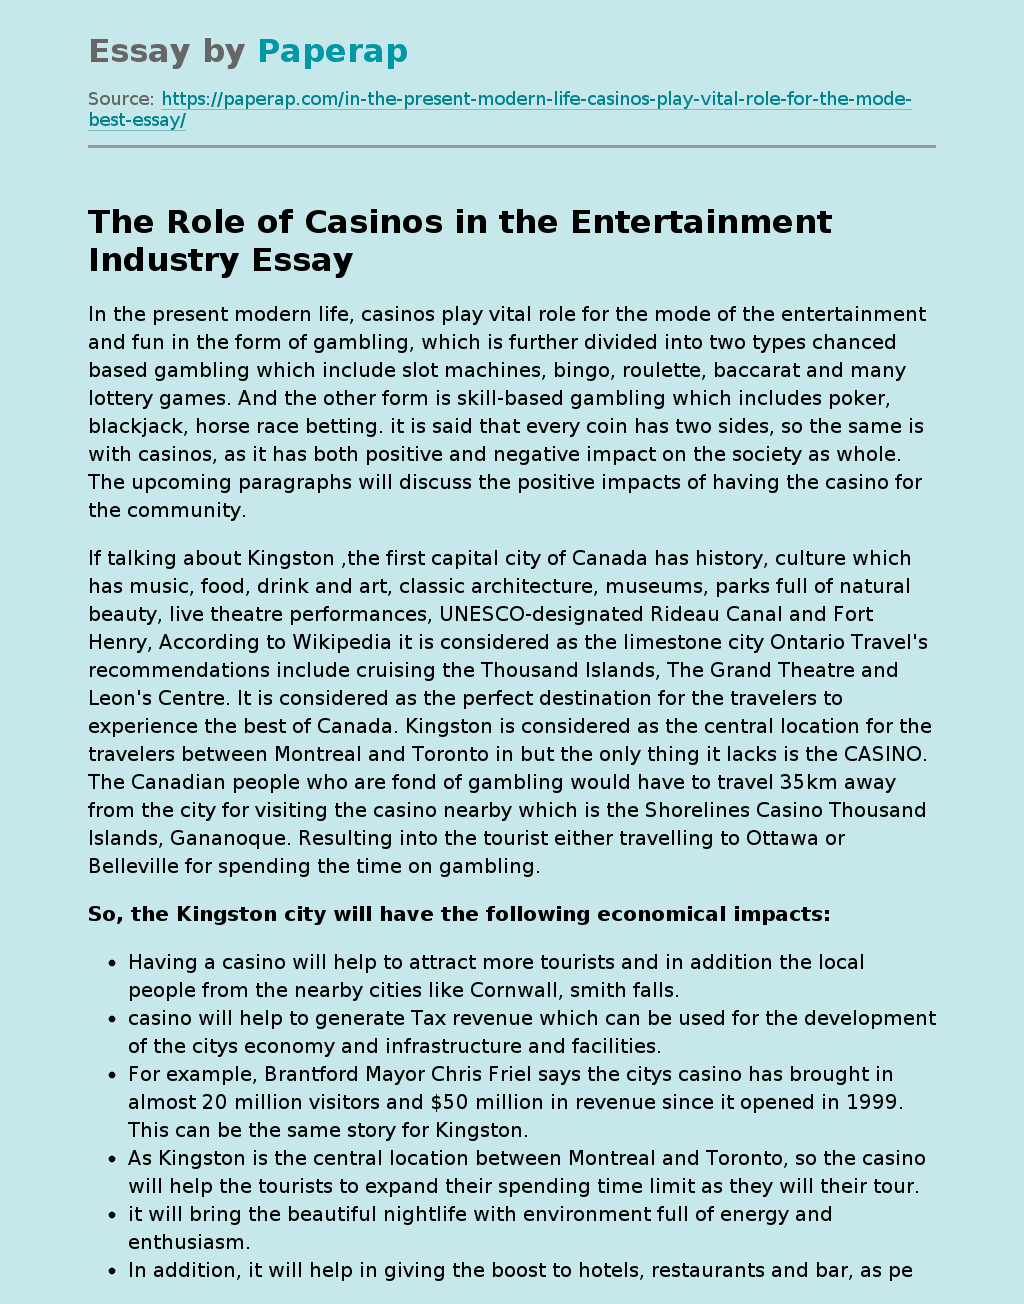 The Role of Casinos in the Entertainment Industry